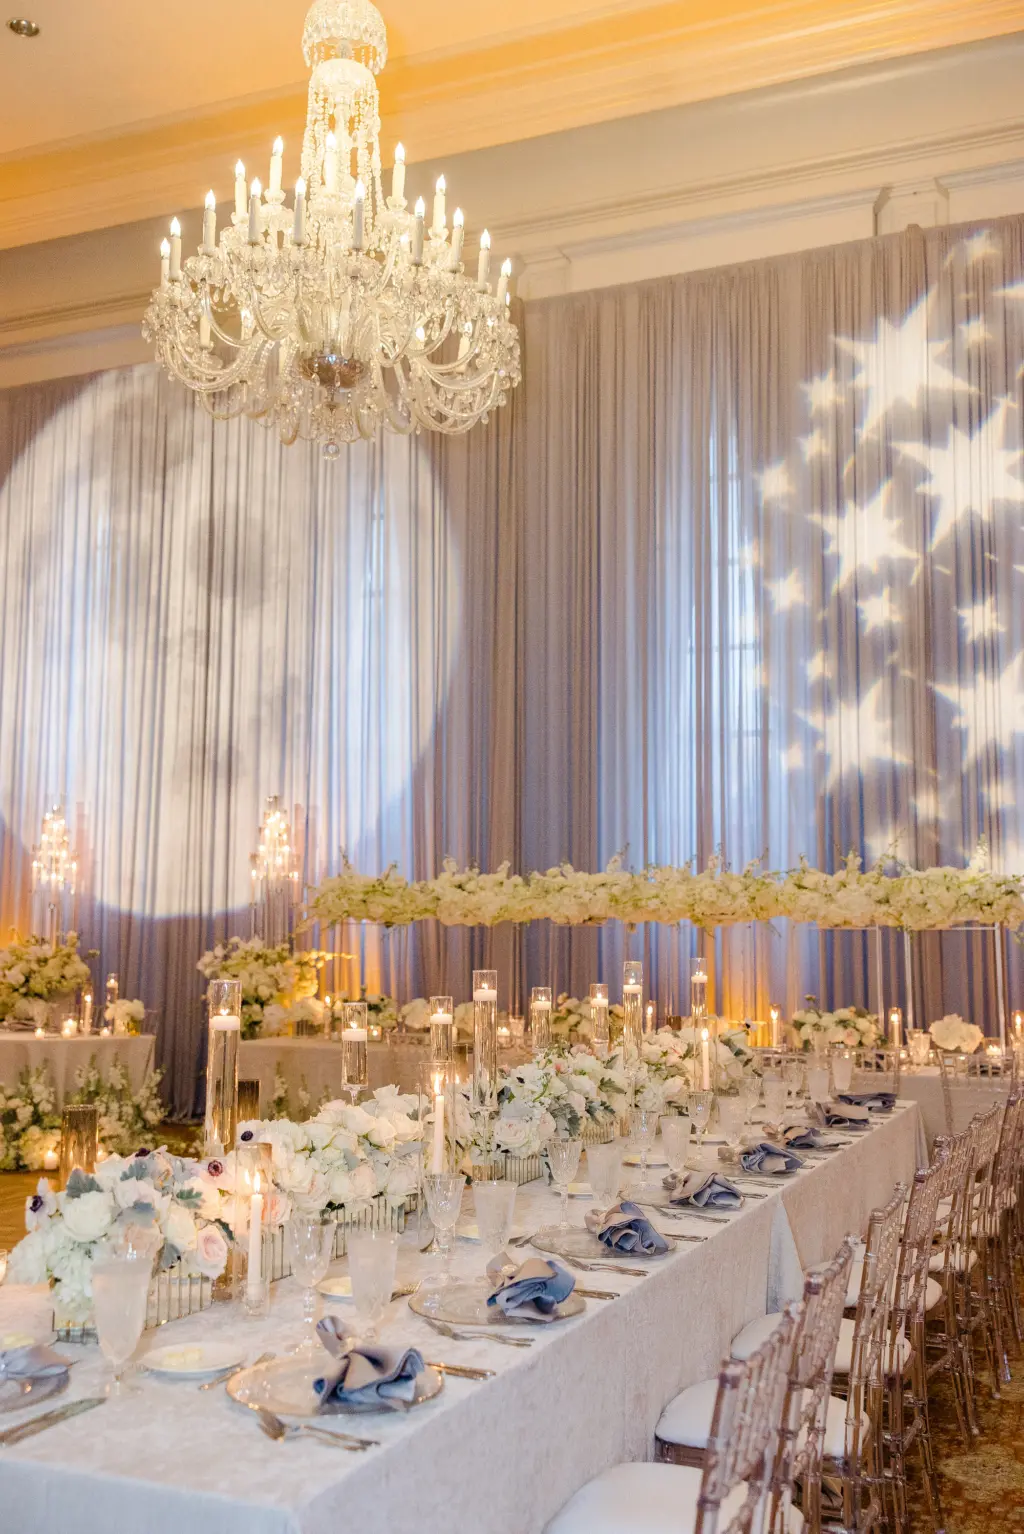 Whimsical White Wedding Reception Inspiration | Long Feasting Tables with Floating Candles, and Rose Table Top Flower Arrangement Ideas | Tampa Bay Lighting and DJ Grant Hemond & Associates